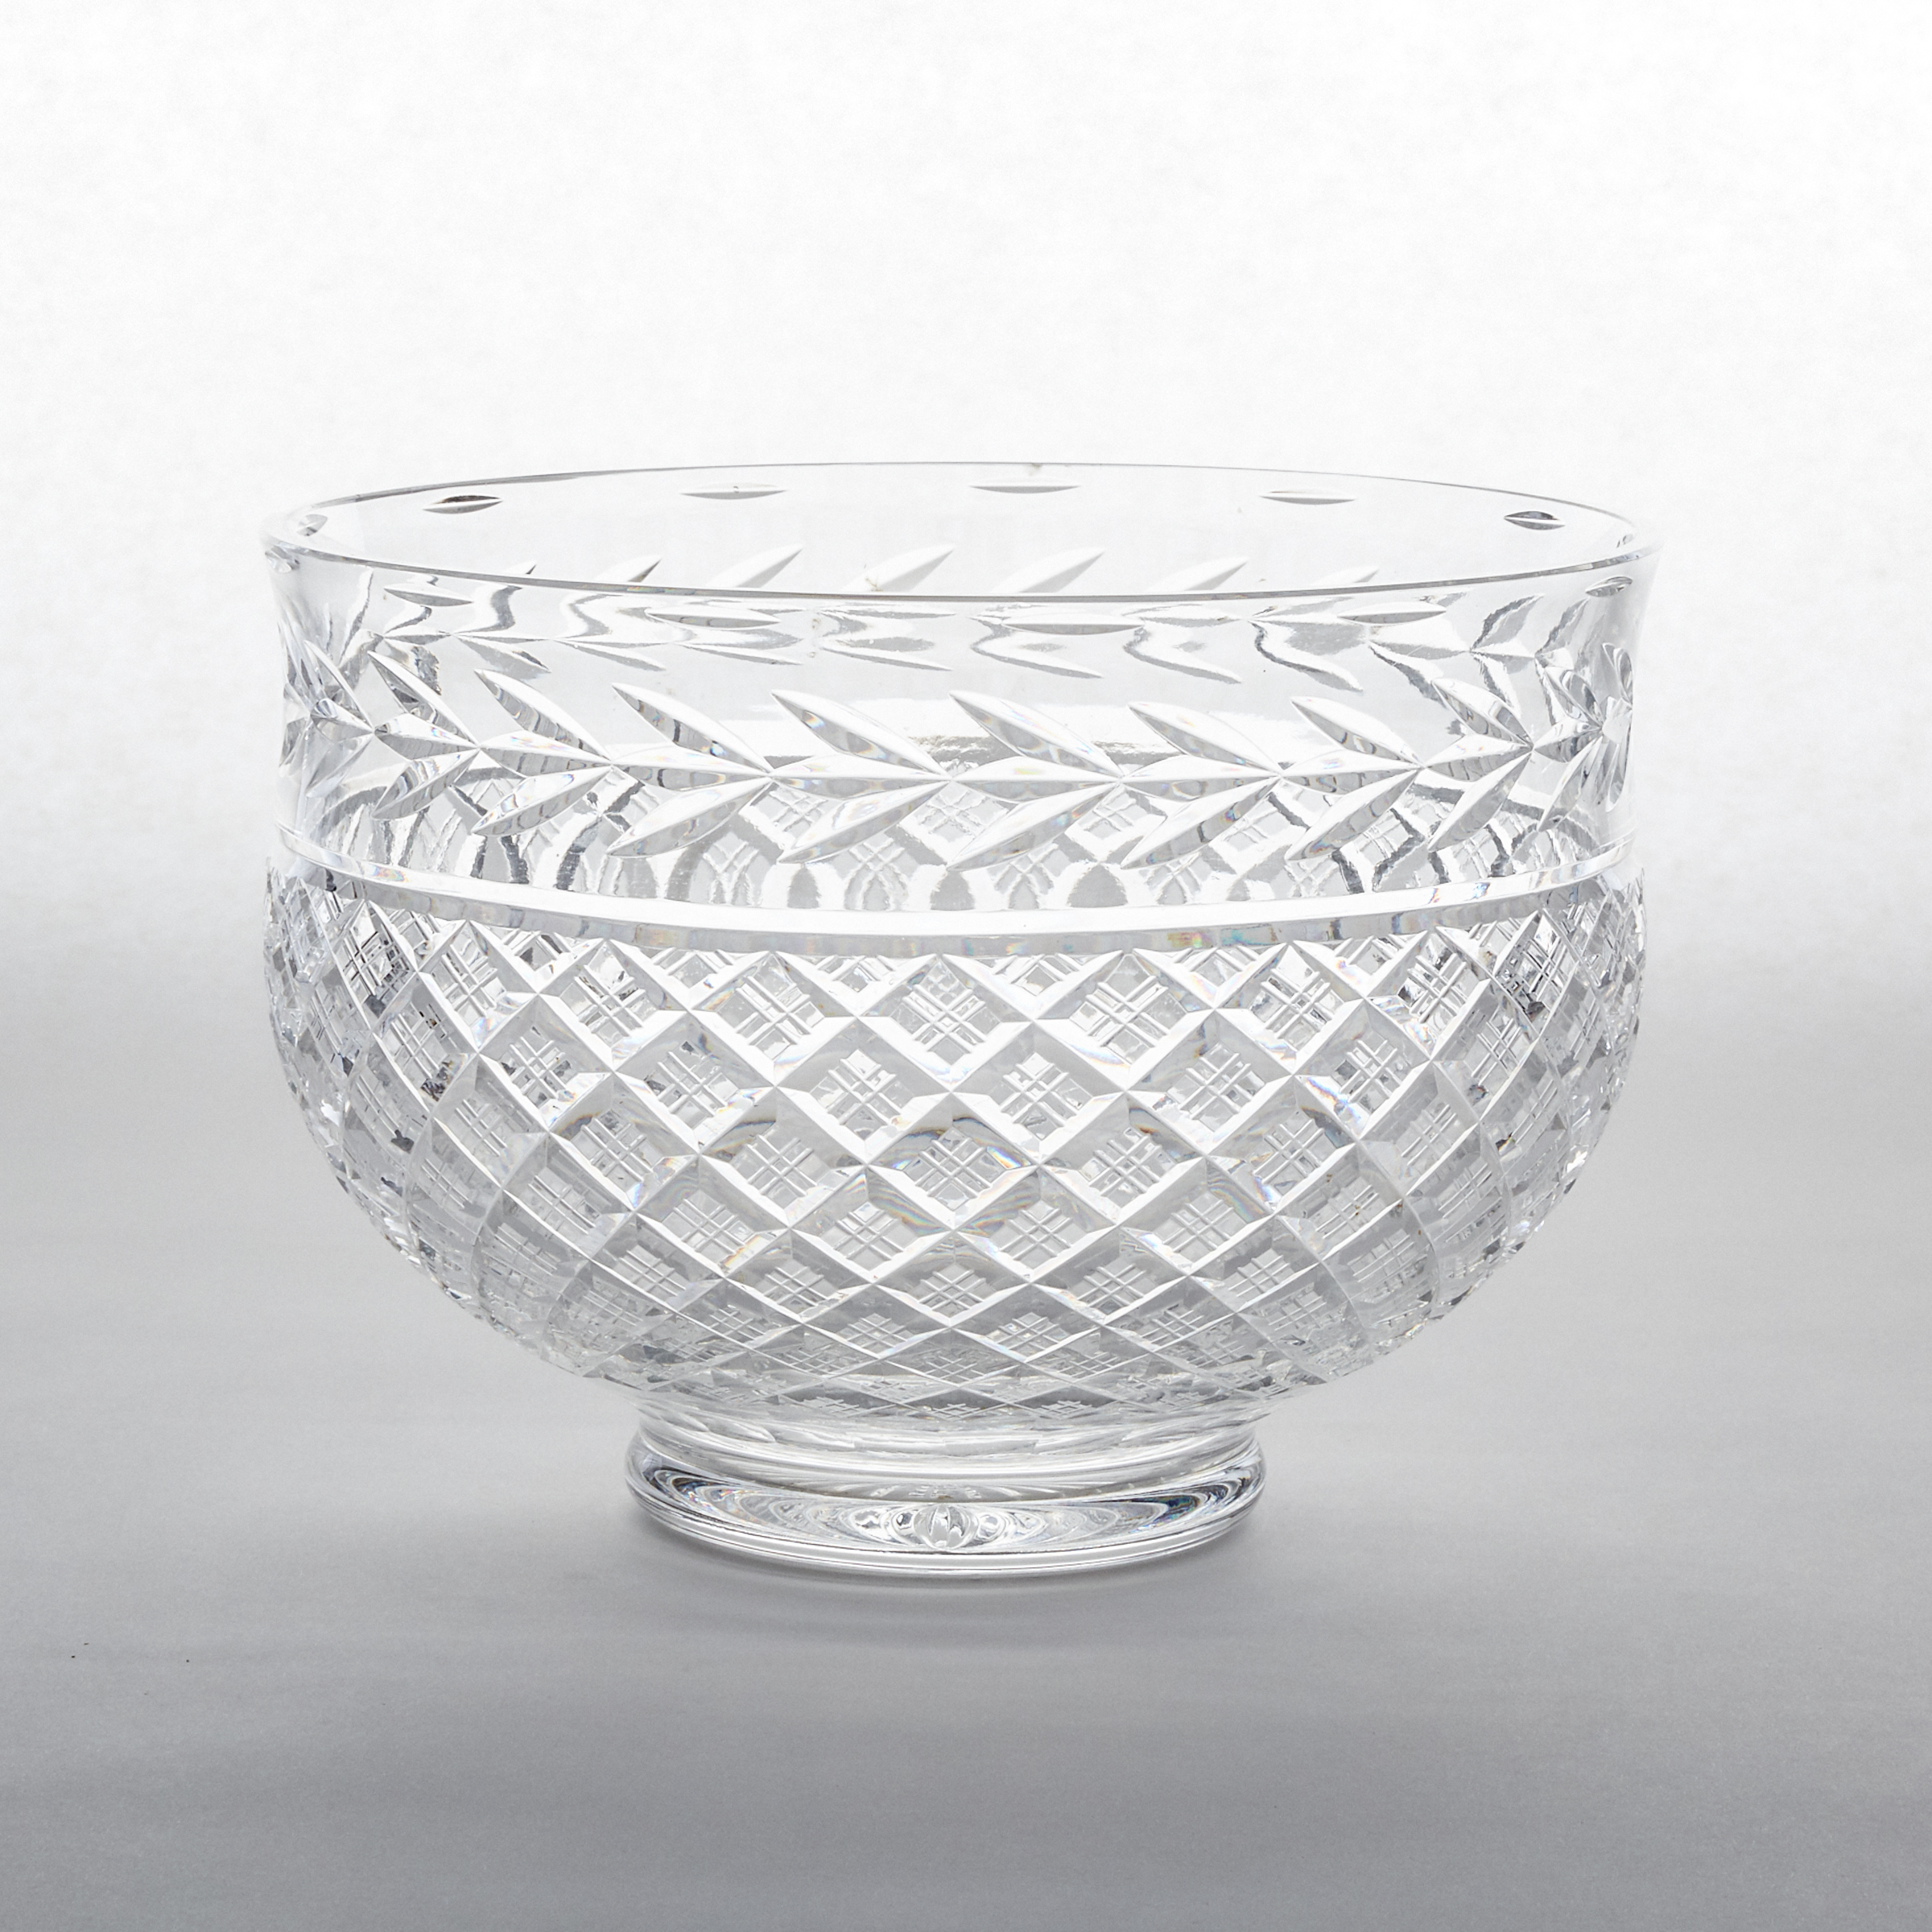 Large Waterford 'Glandore' Cut Glass Punch Bowl, 20th century